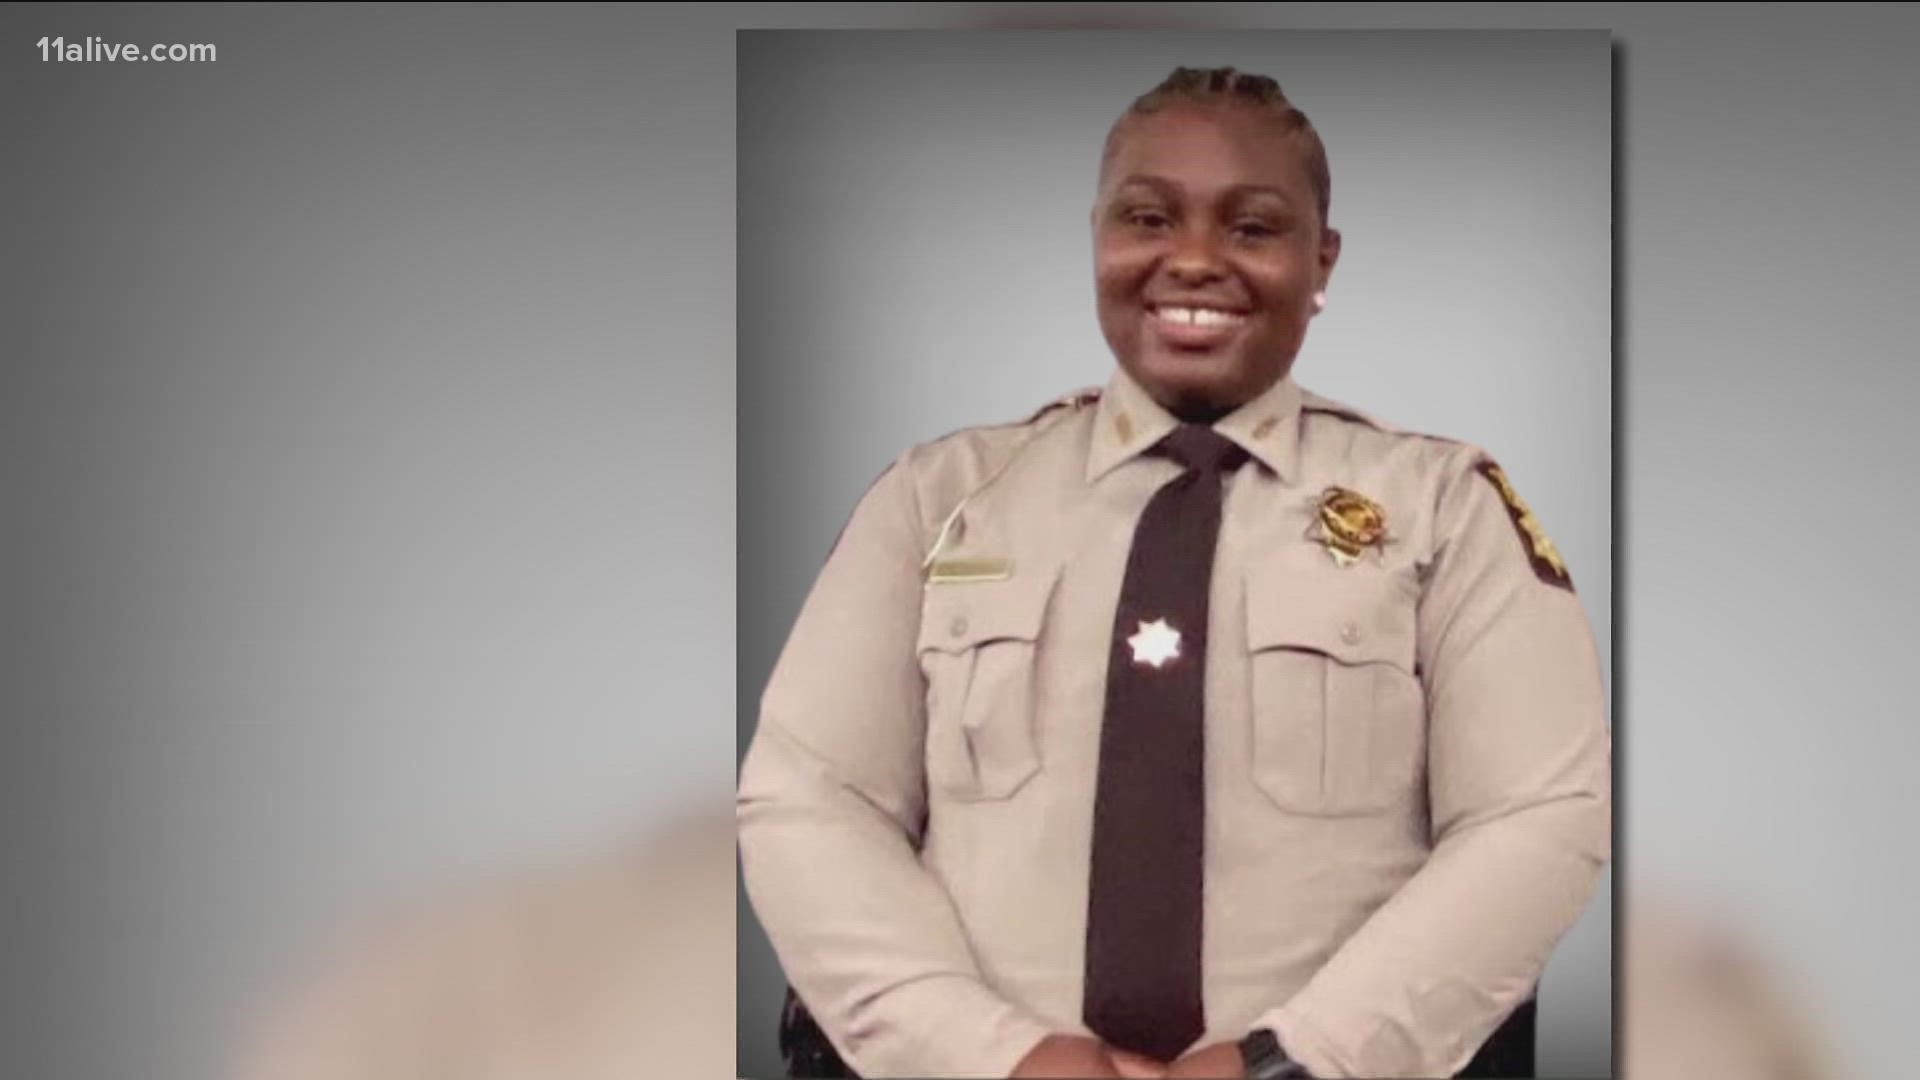 Shakeema Brown Jackson was killed at a home in Newton County, the Fulton County Sheriff's Office said. The sheriff's office called it an "alleged domestic incident."